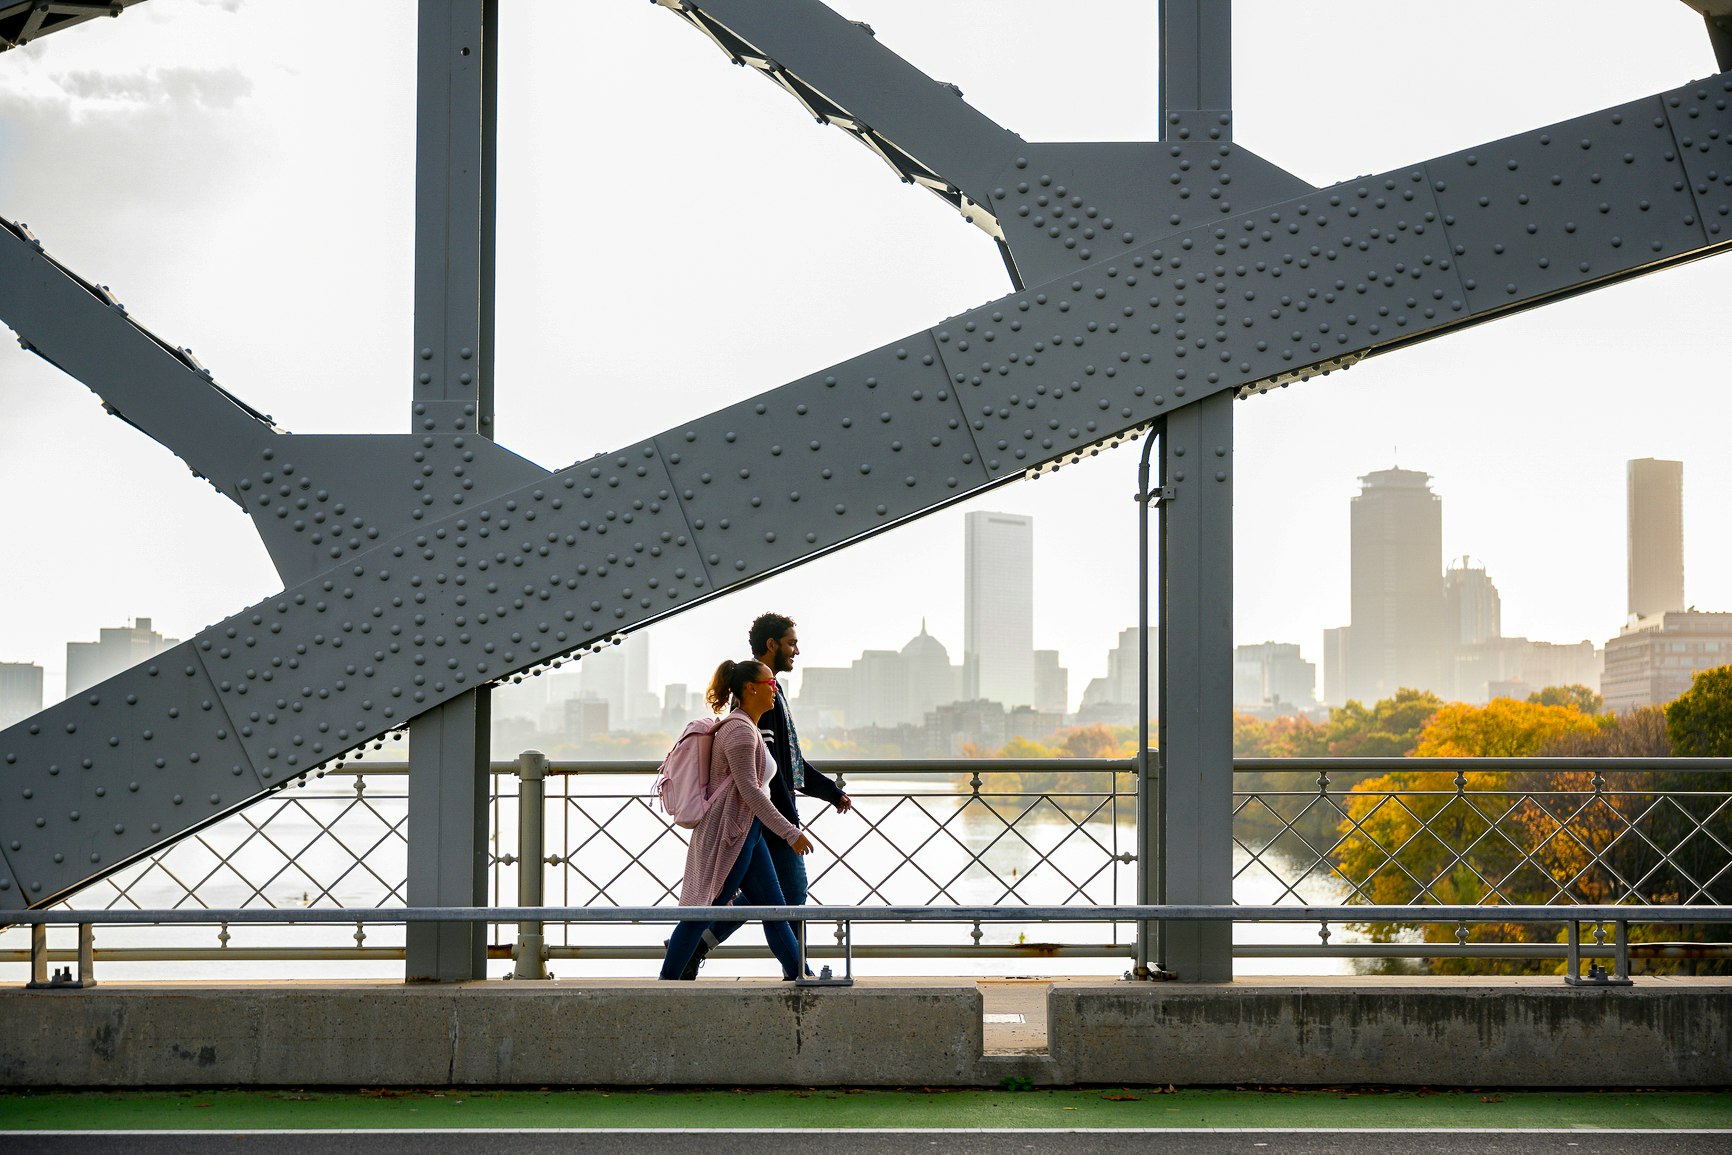 A man and woman walking together along a bridge with the Boston skyline in the background